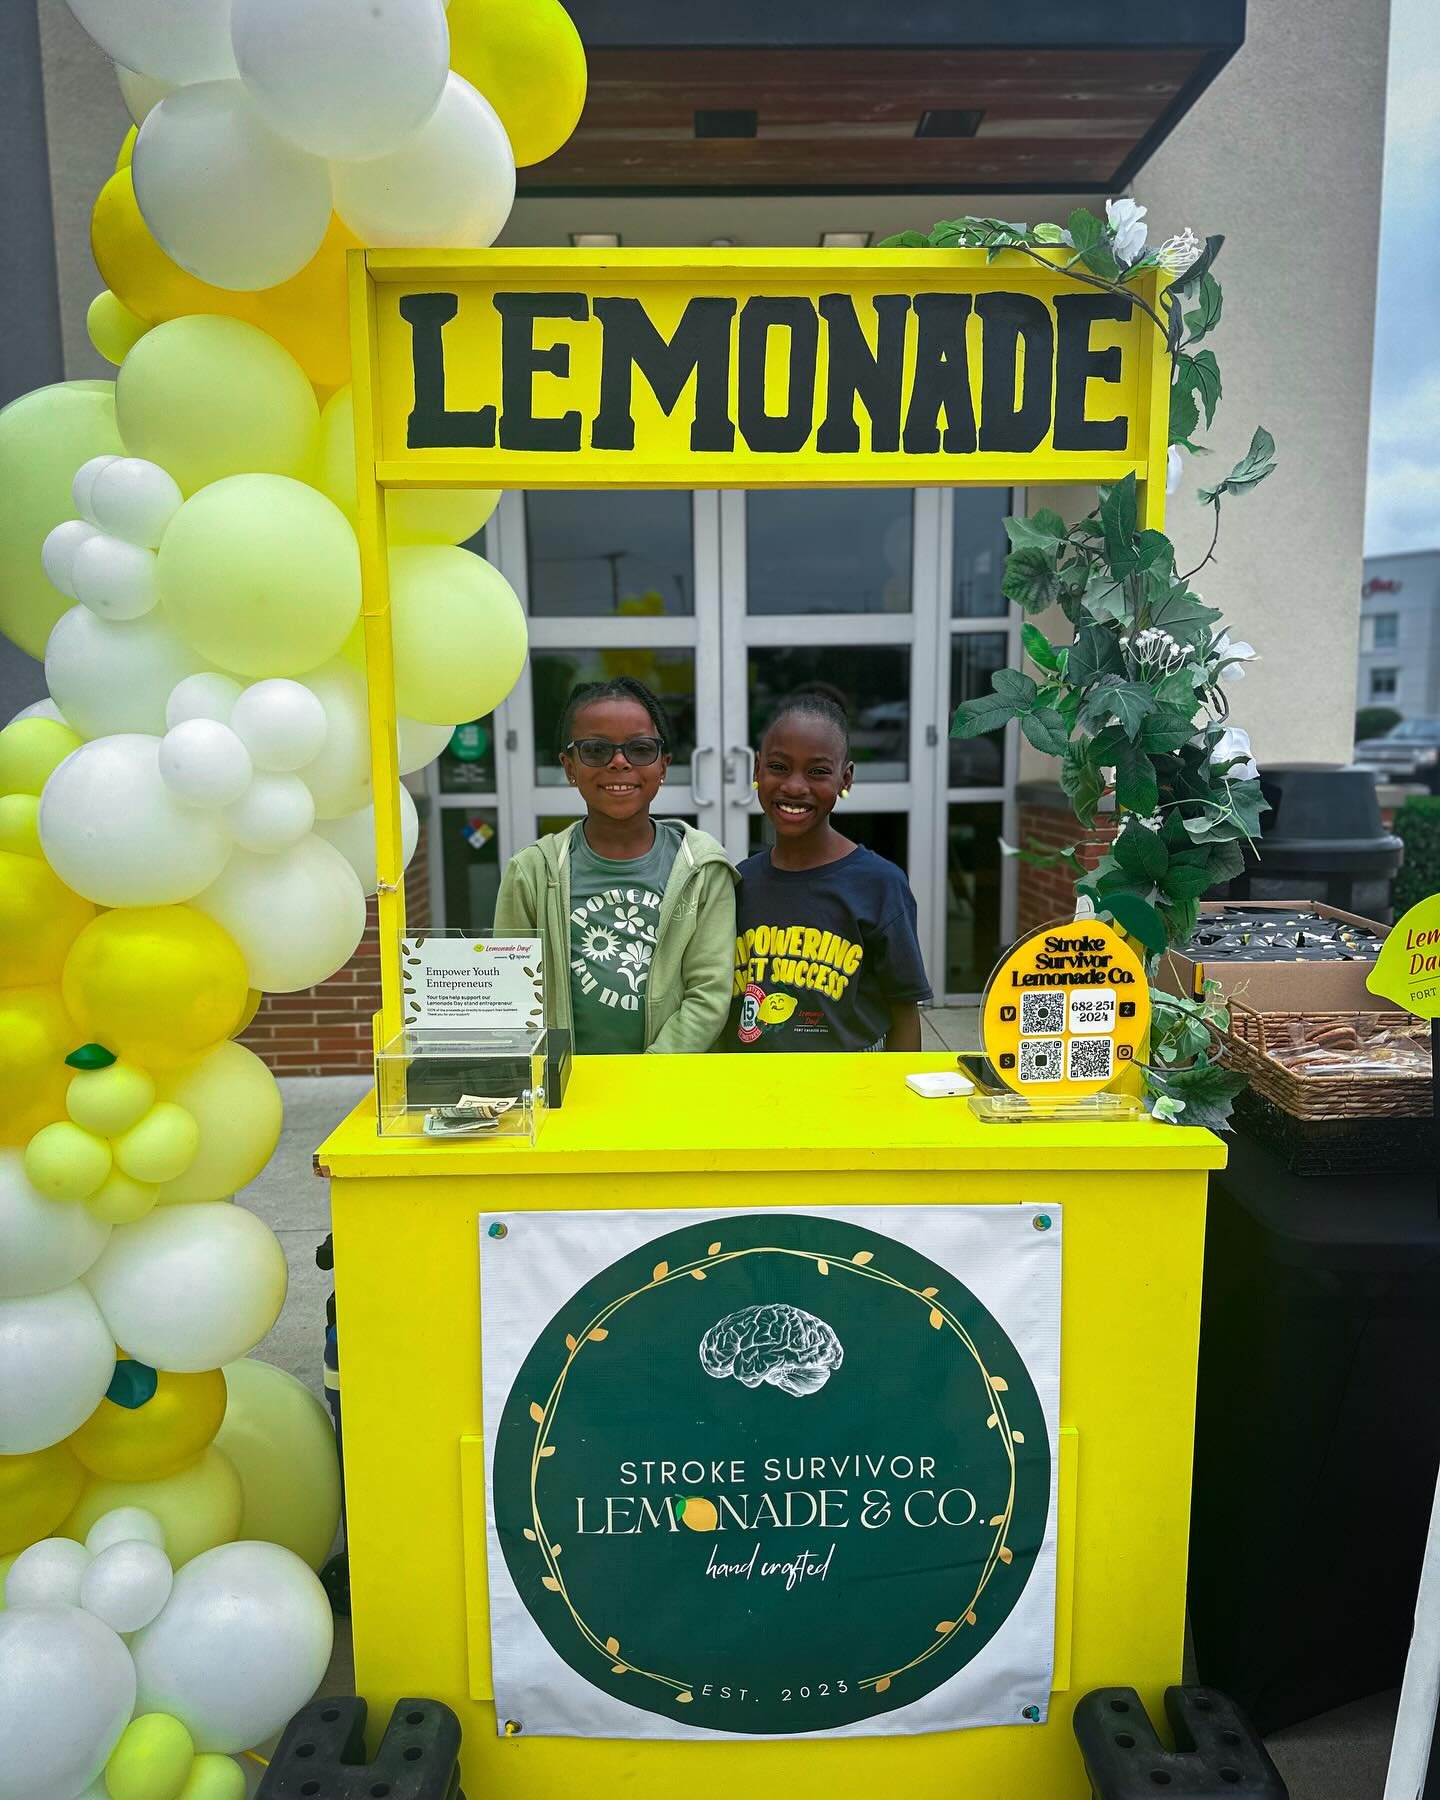 🌧️ Despite the rain, my friends brought their own sunshine to my lemonade stand! Thank ya&rsquo;ll so much for stoping by &amp; supporting me. 🍋

🎈 Thank you @alexanderreignco for adding the perfect pop to my lemonade stand with this incredible ba